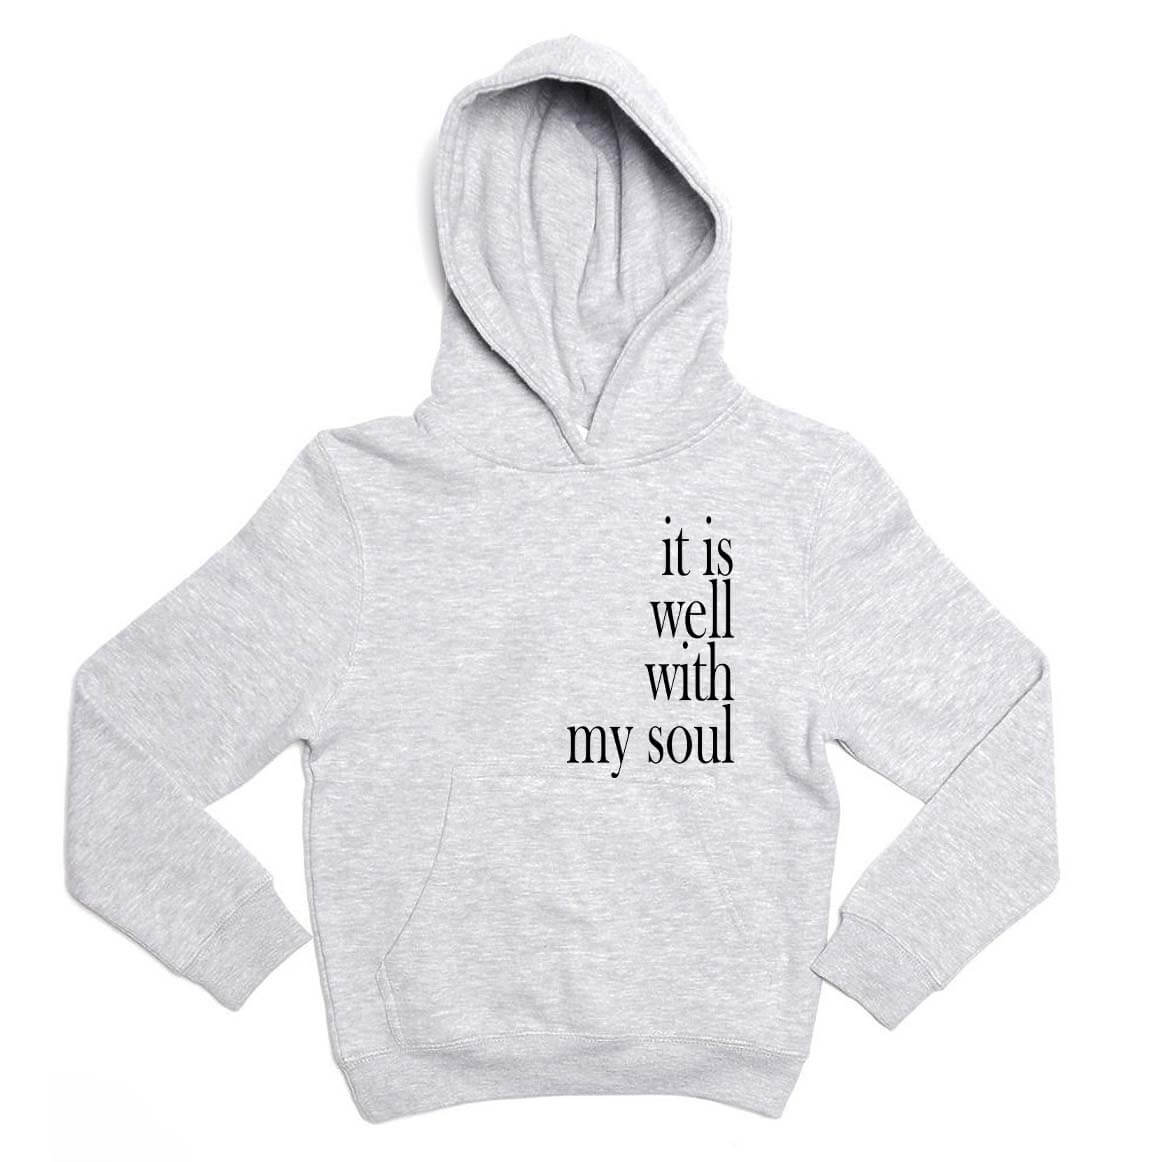 It Is Well With My Soul Youth Sweatshirt Hoodie